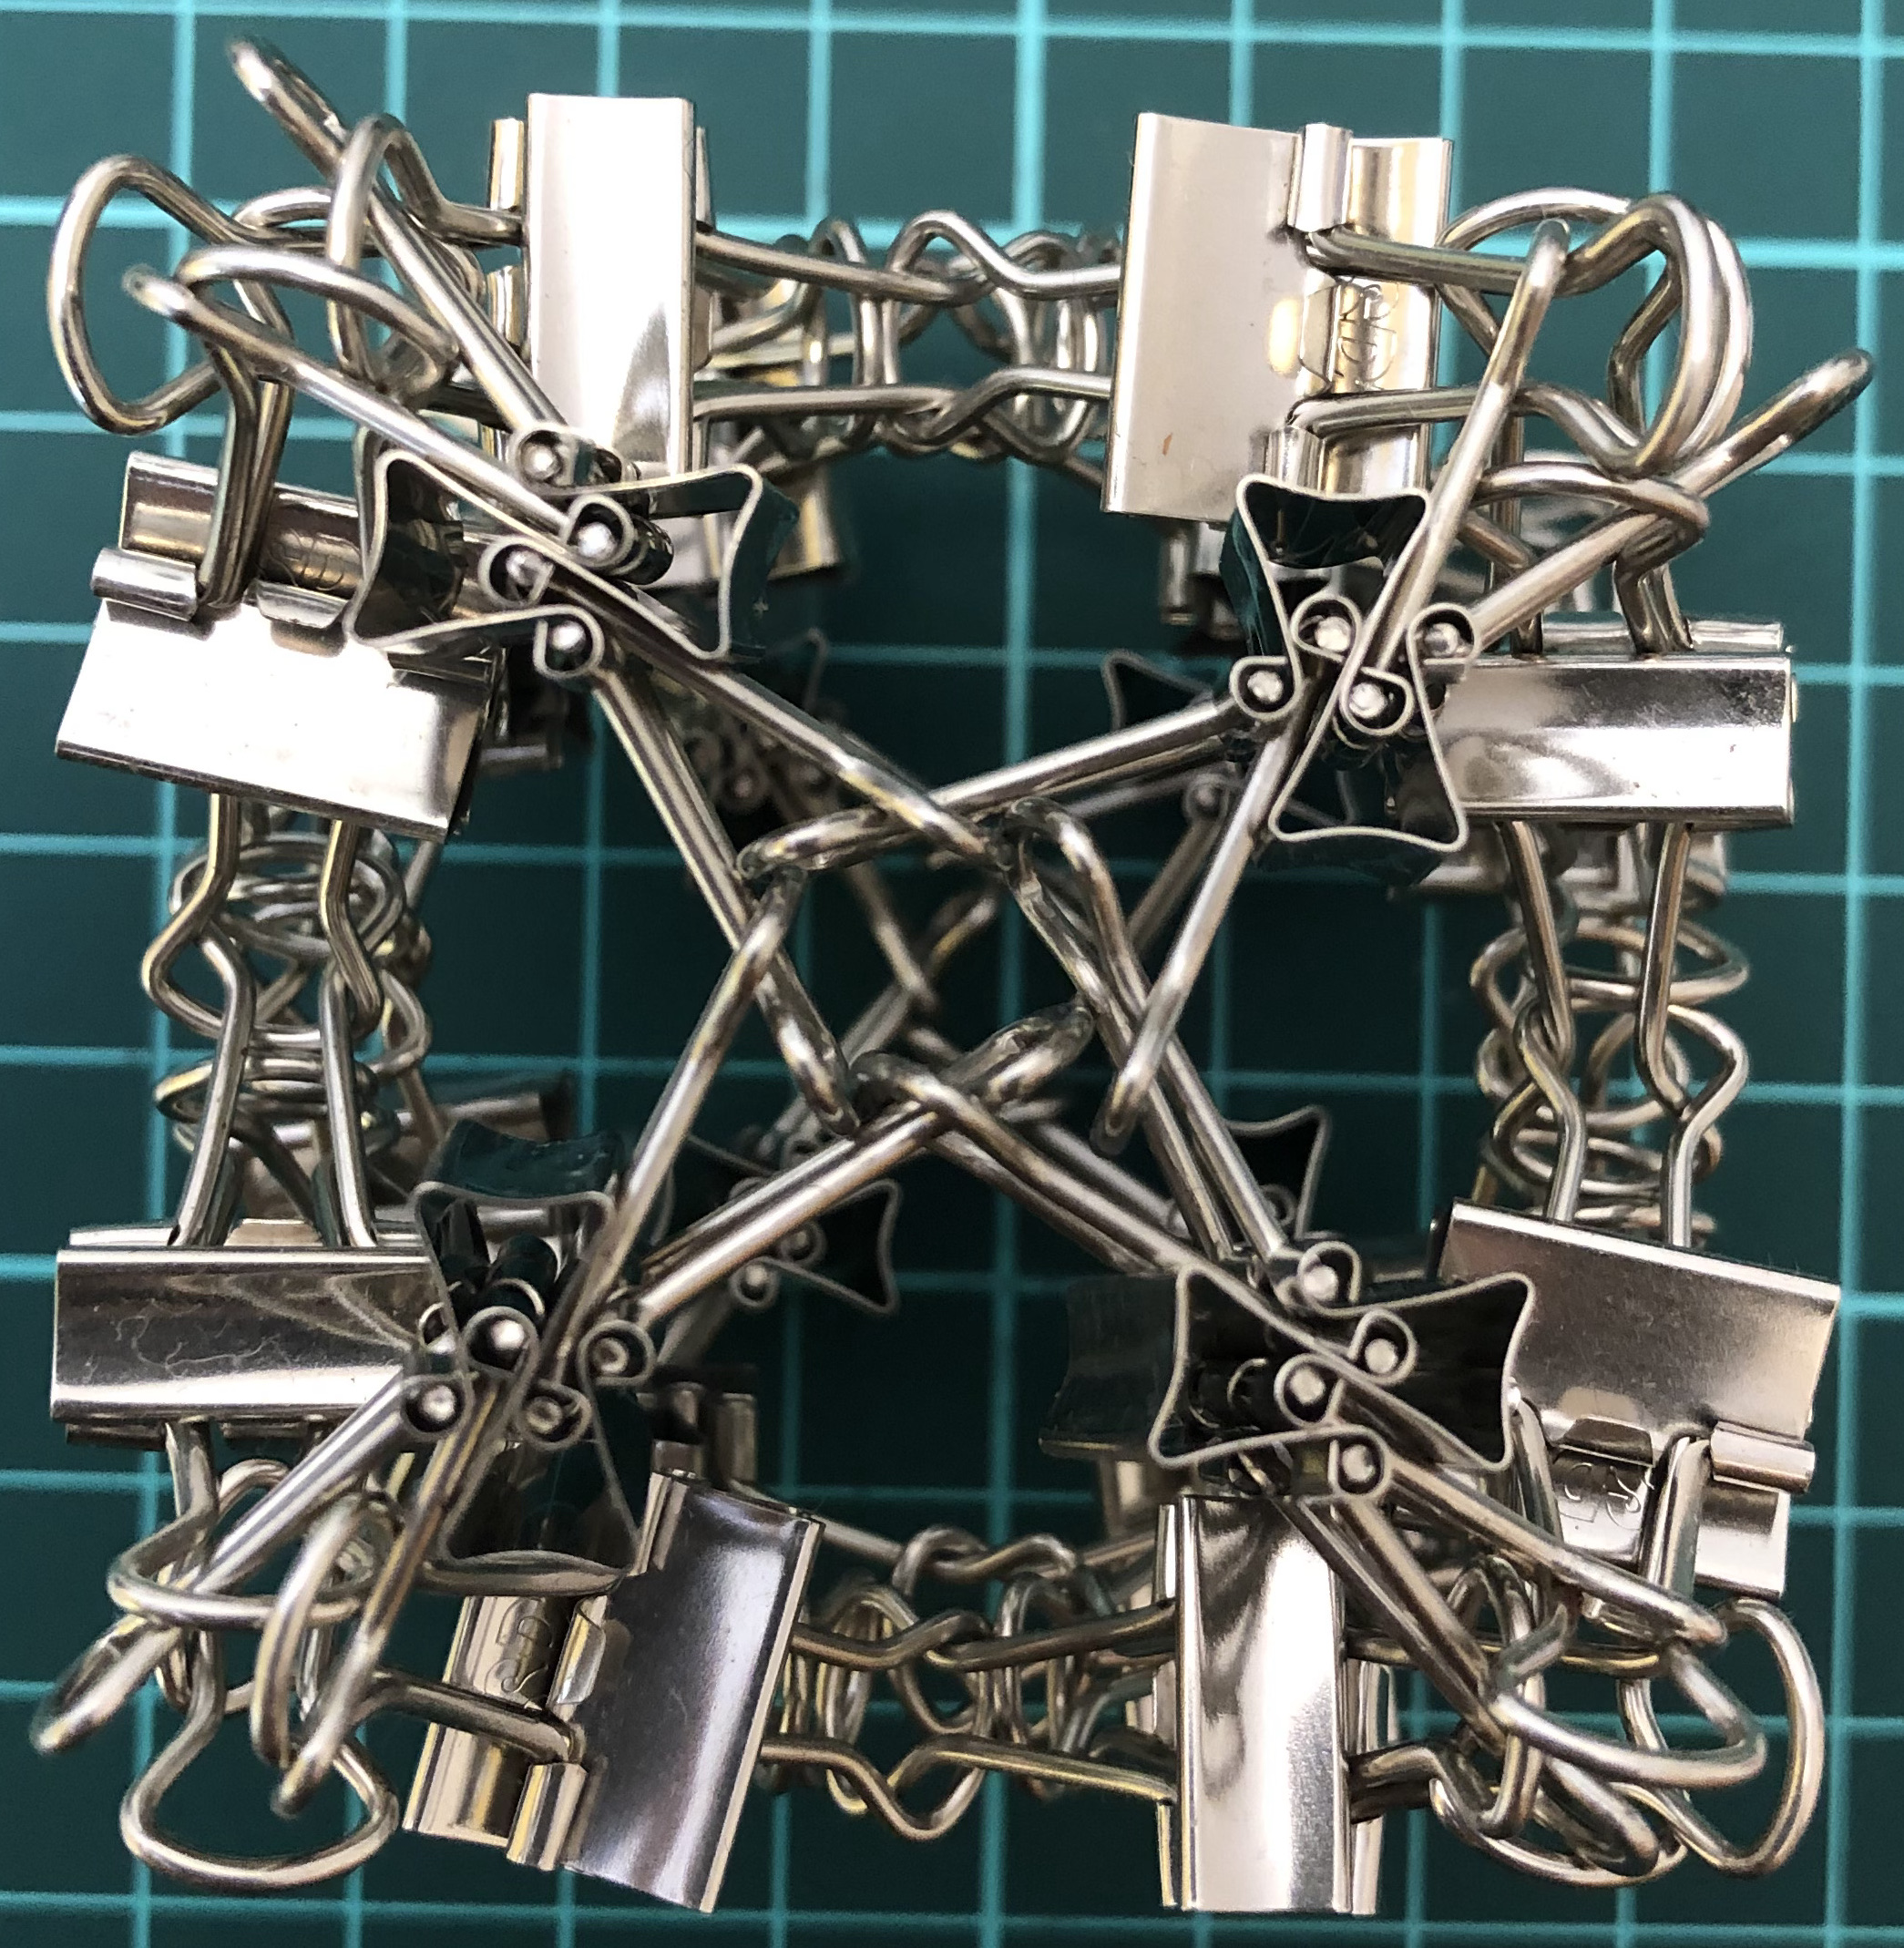 48 clips forming 24 I-edges forming rhombic dodecahedron